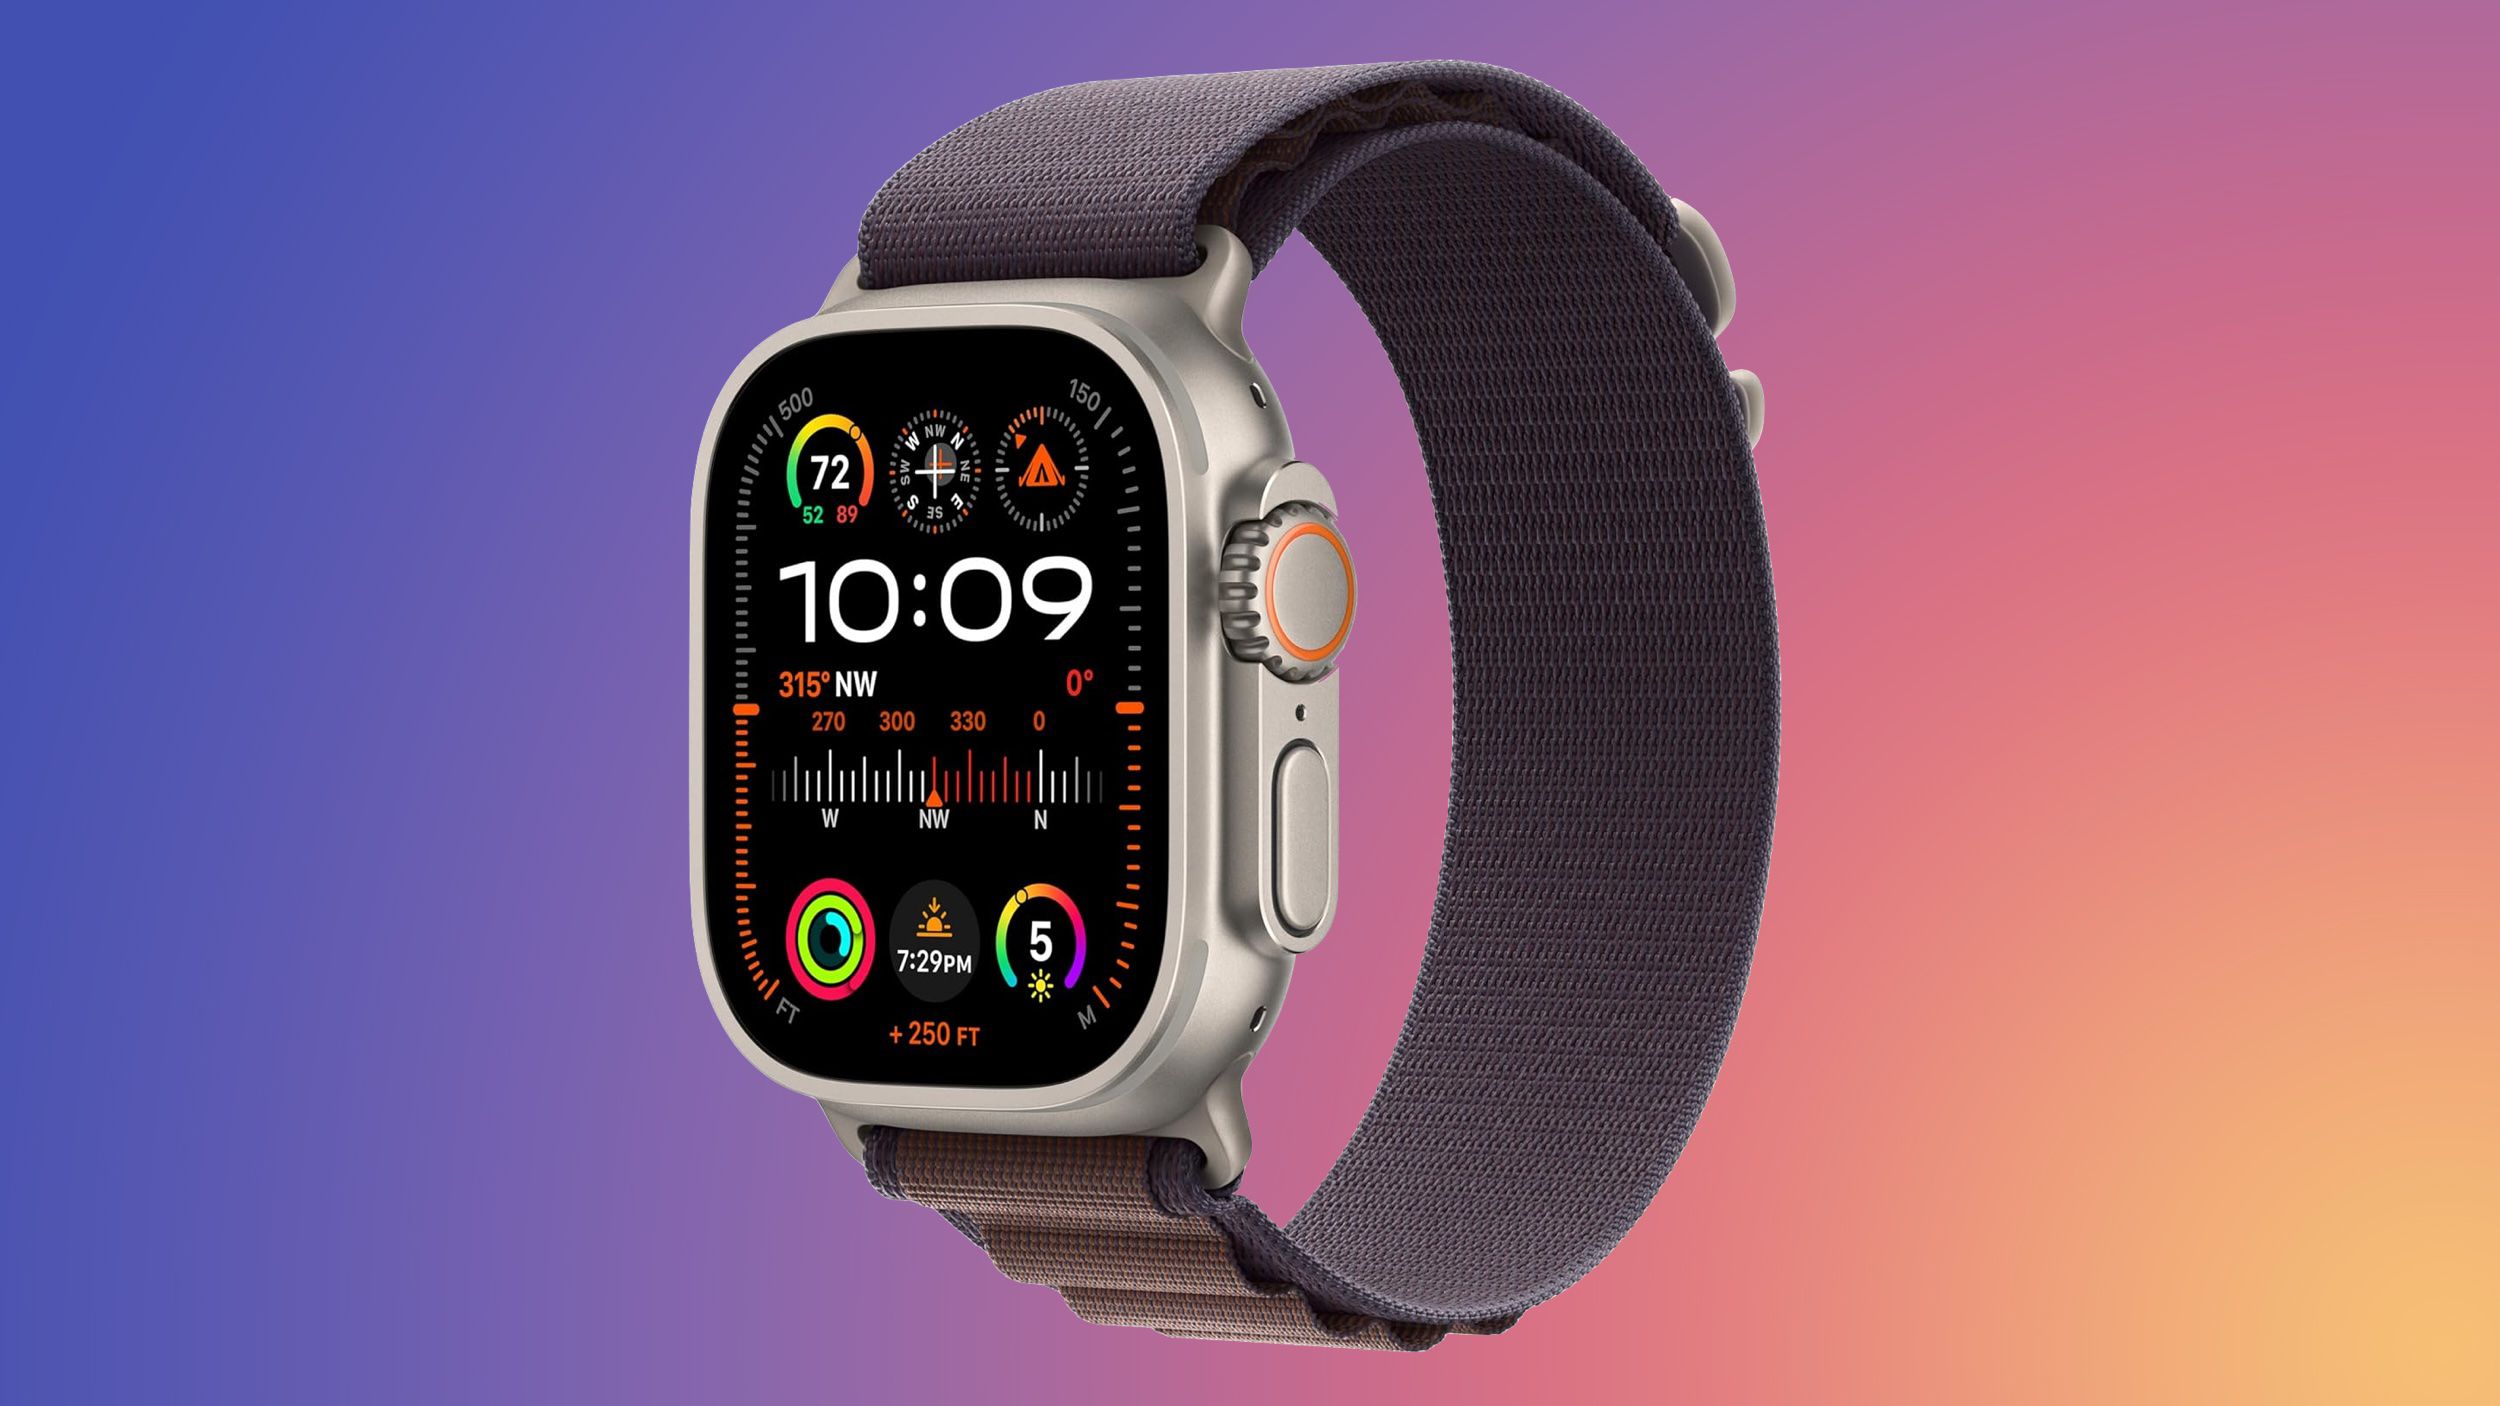 Apple Abandons MicroLED Display Plans for Apple Watch, Cuts Engineering Jobs